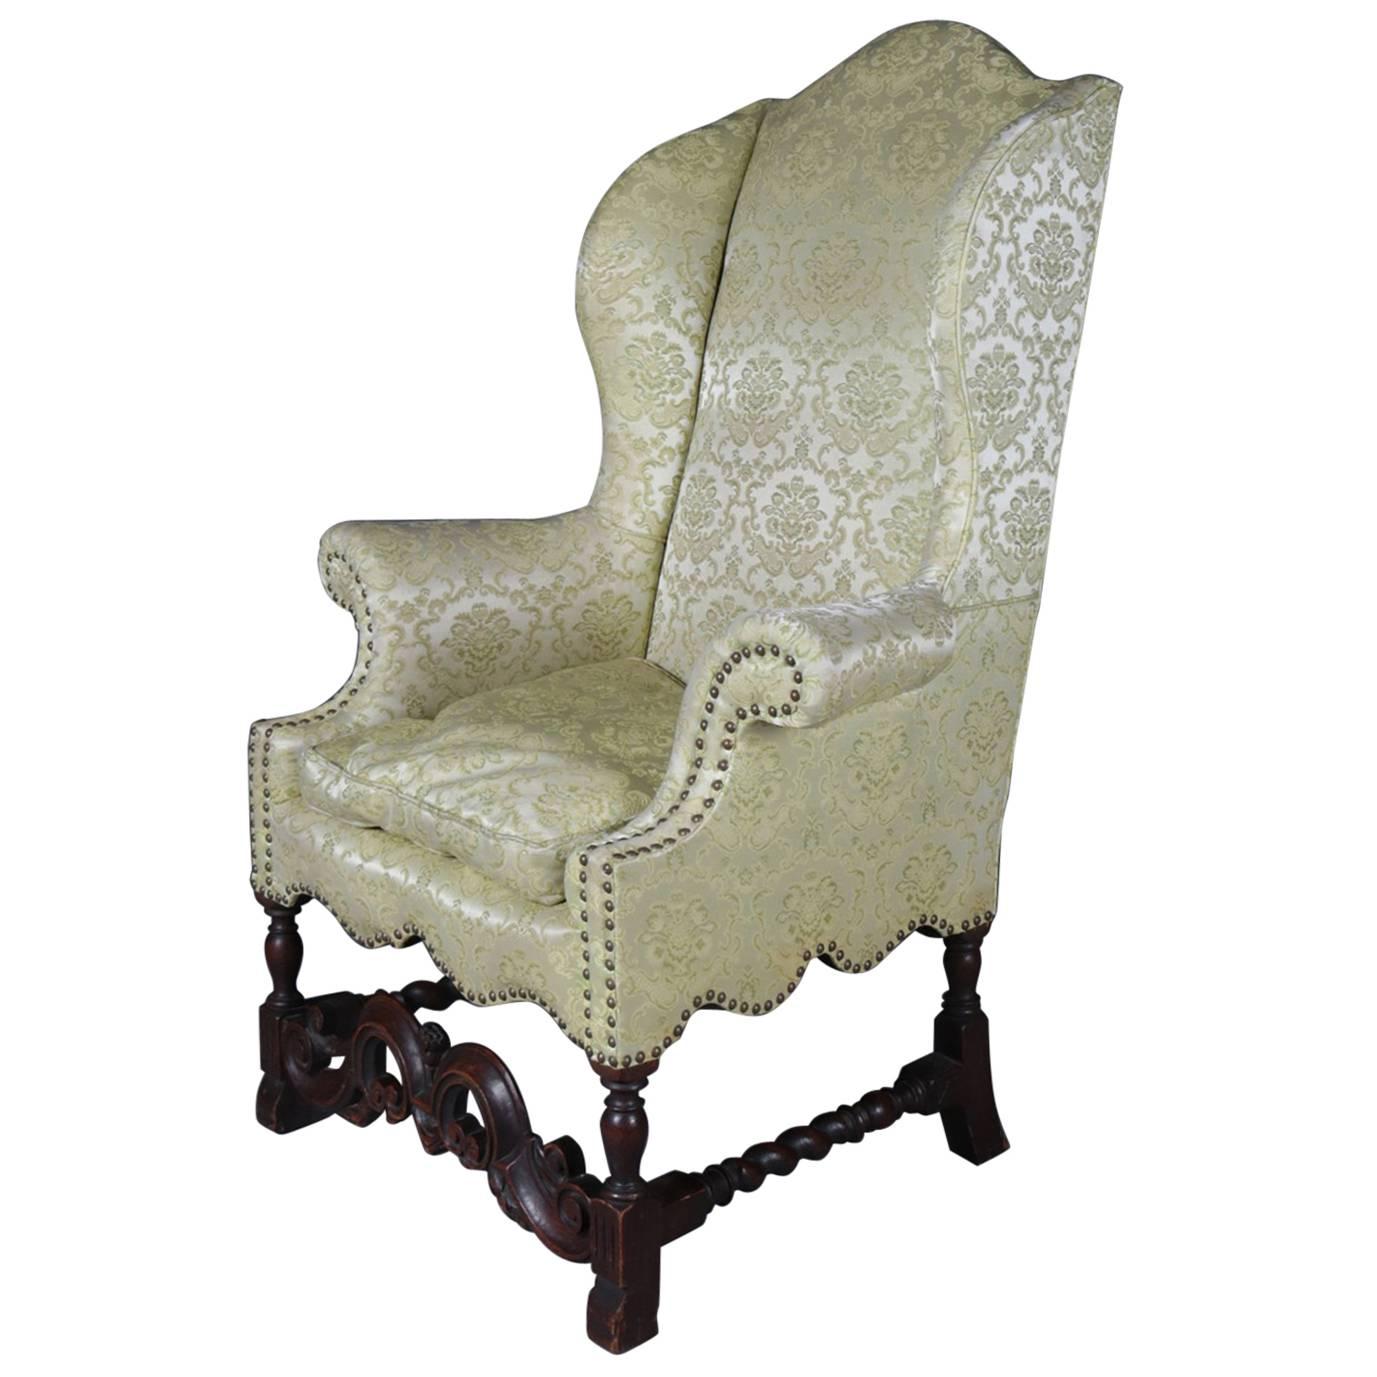 Antique English Edwardian Carved Mahogany Upholstered Wingback Chair, circa 1910